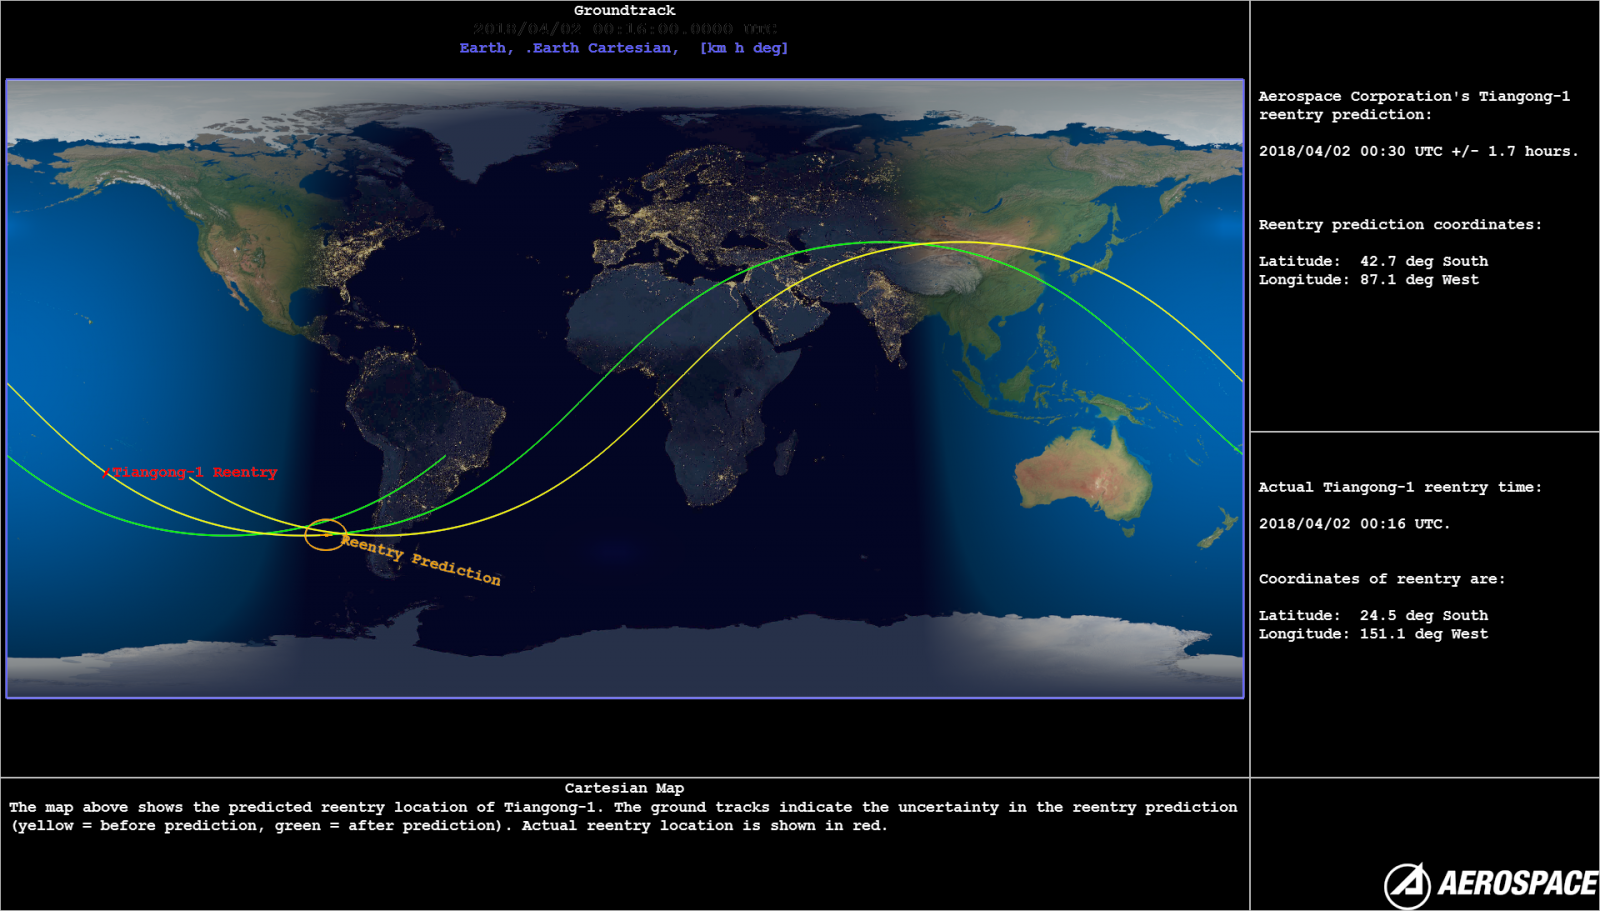 Tiangong1 re-entry map